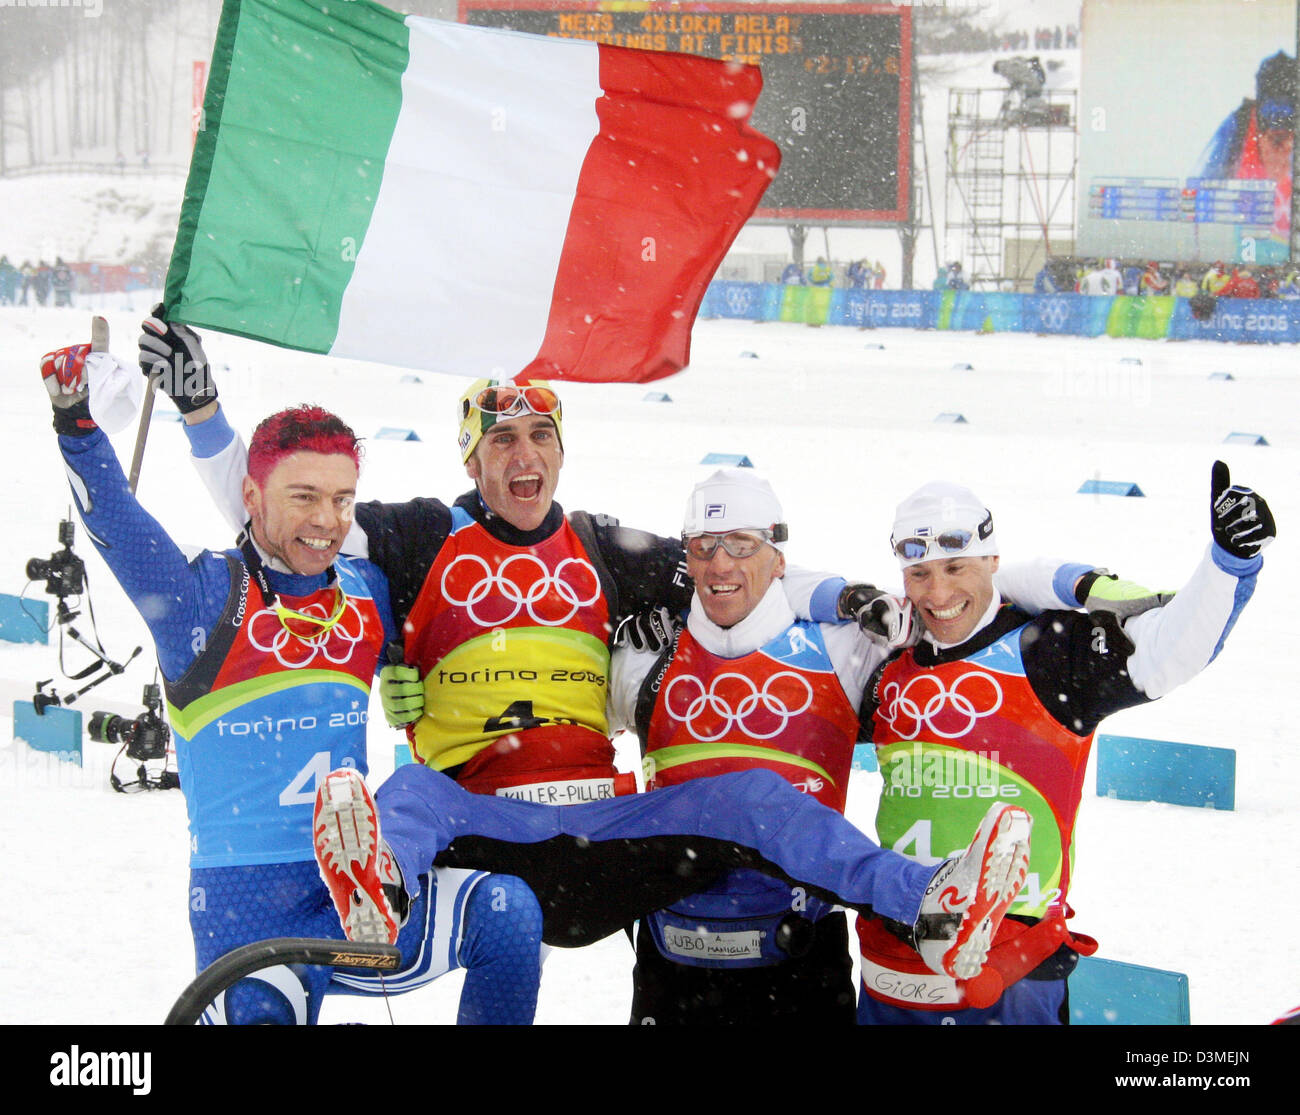 The Italian relay runners Christian Zorzi, Pietro Piller Cottrer, Fulvio Valbusa and Giorgio di Centa celebrate with the Italian flag their victory in the men's 4x10 kilometres cross-country relay competition of the XX Olympic Winter Games, Pragelato Plan near Turin, Italy, Sunday 19 February 2006. Italy won the gold medal ahead of runner-up Germany and Sweden.The XX Olympic Winter Stock Photo